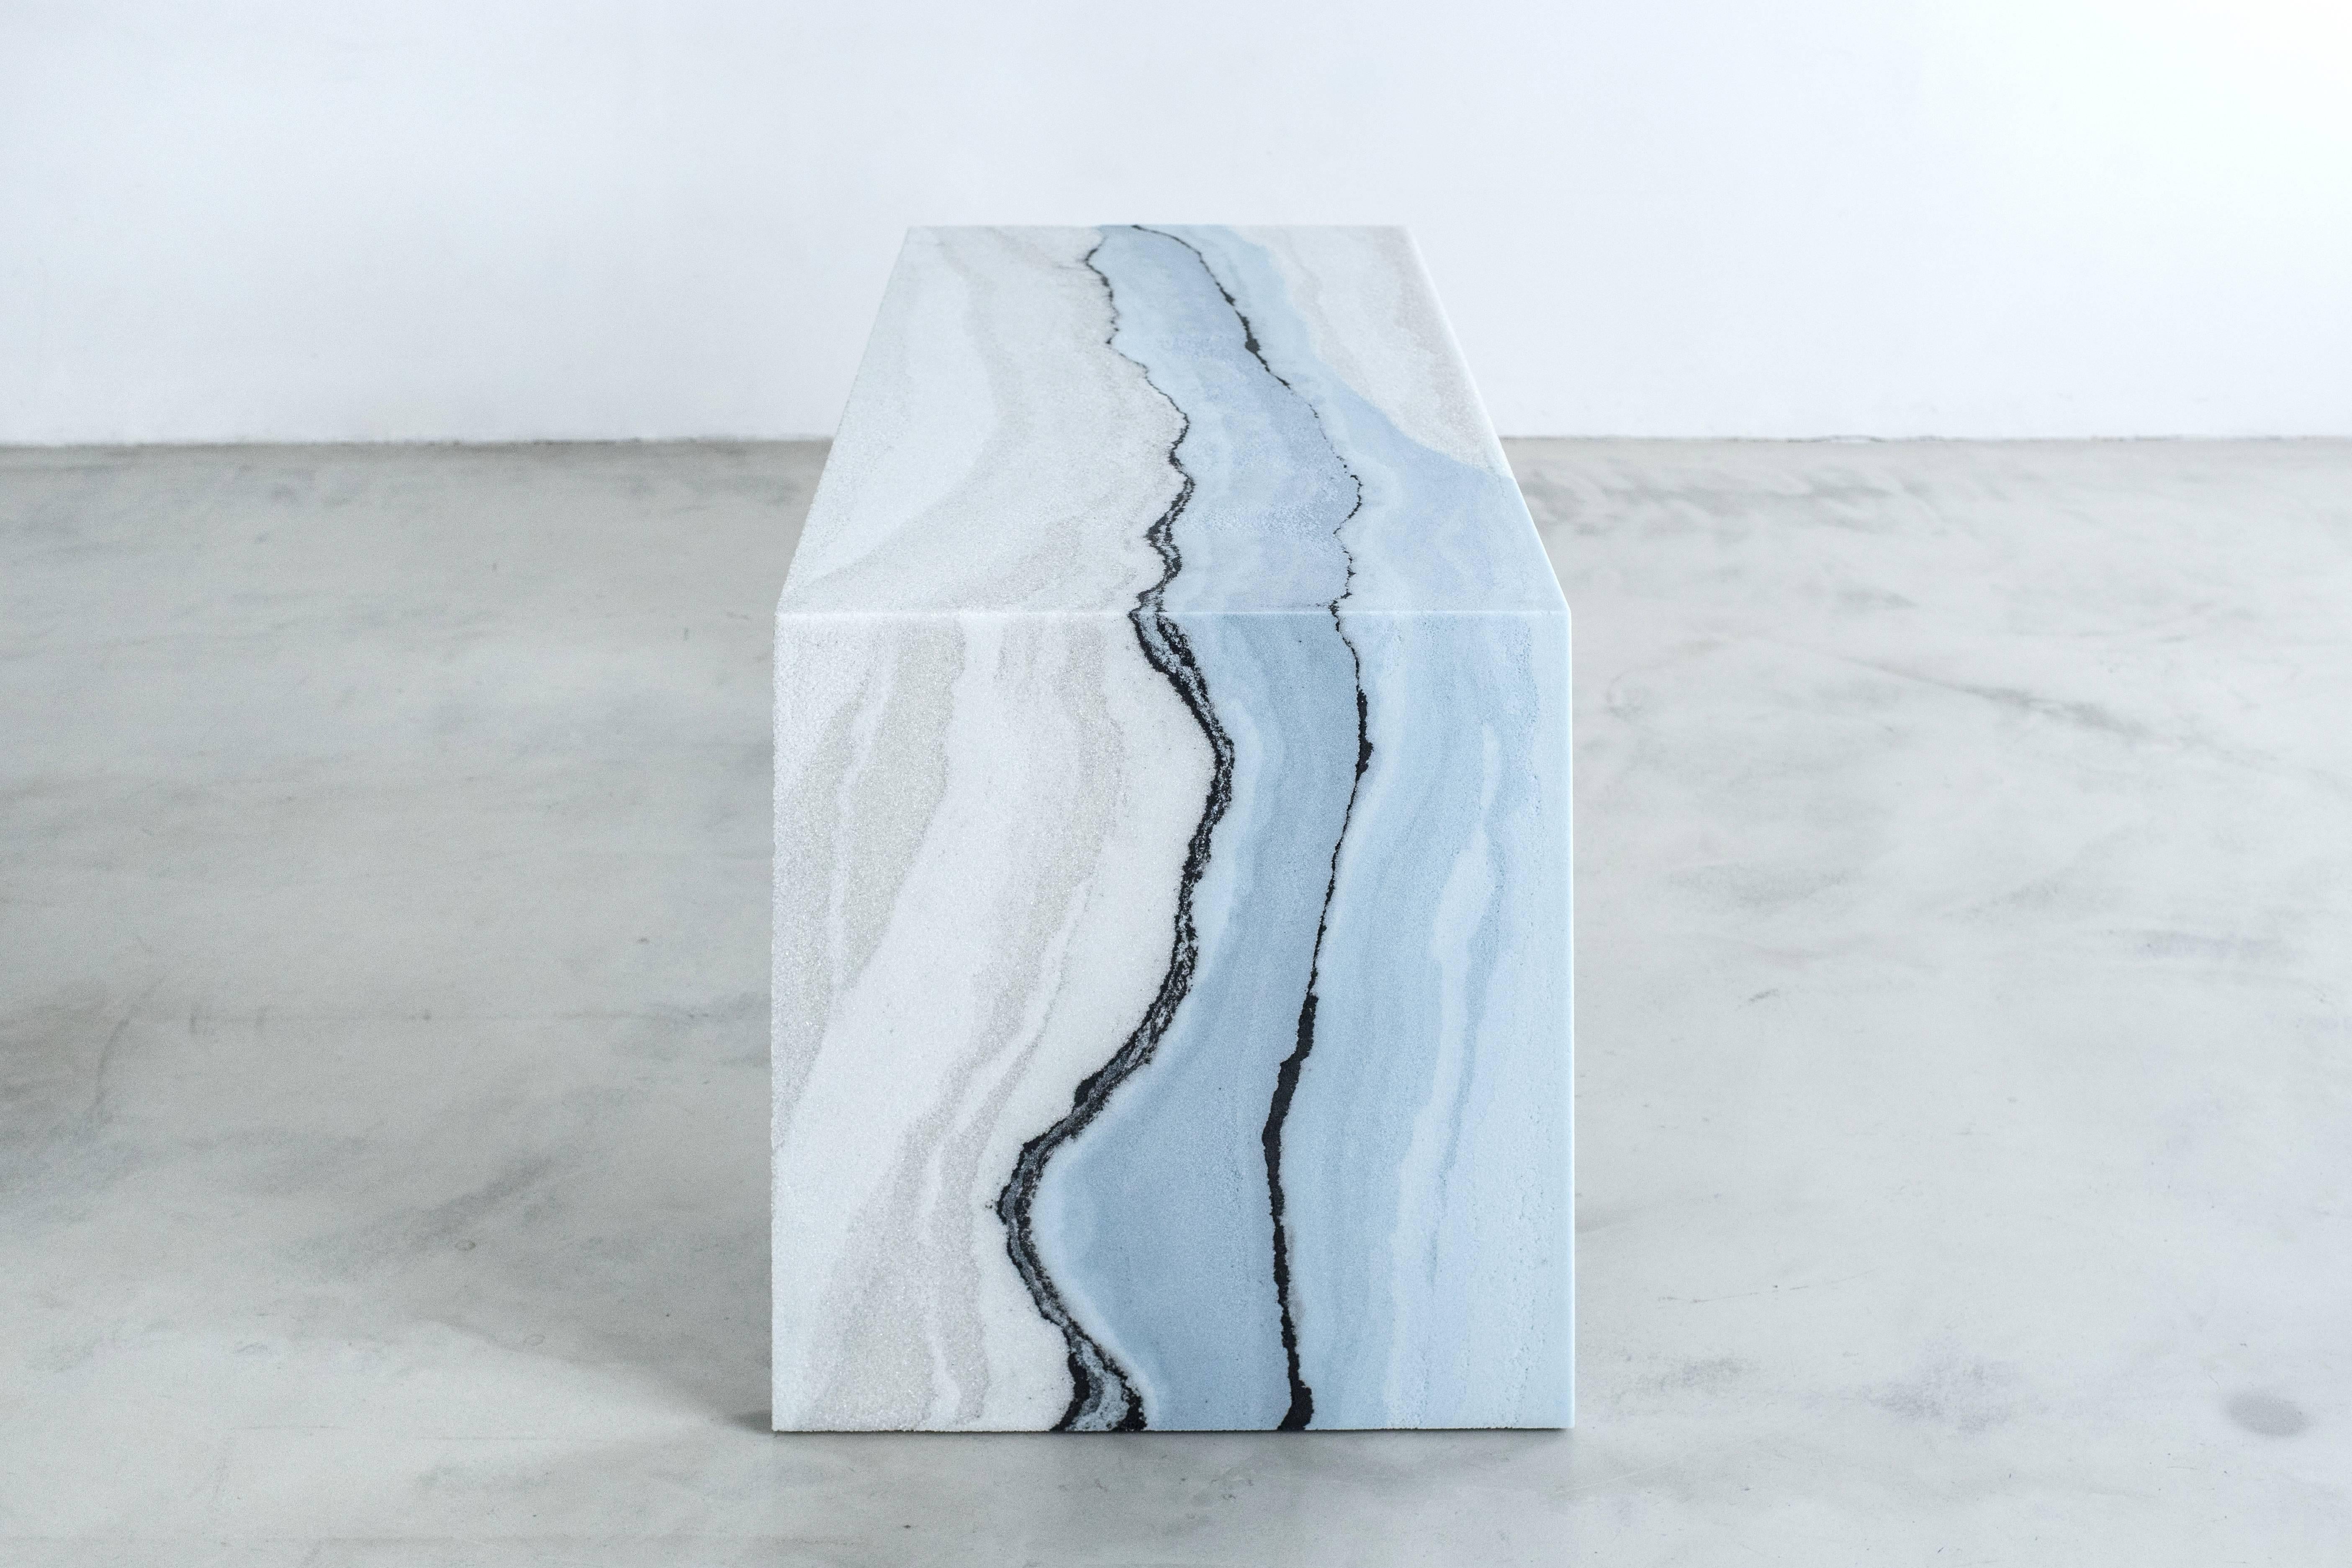 Cast Escape Desk, 'Patagonia', Crushed Glass and Black Silica by Fernando Mastrangelo For Sale